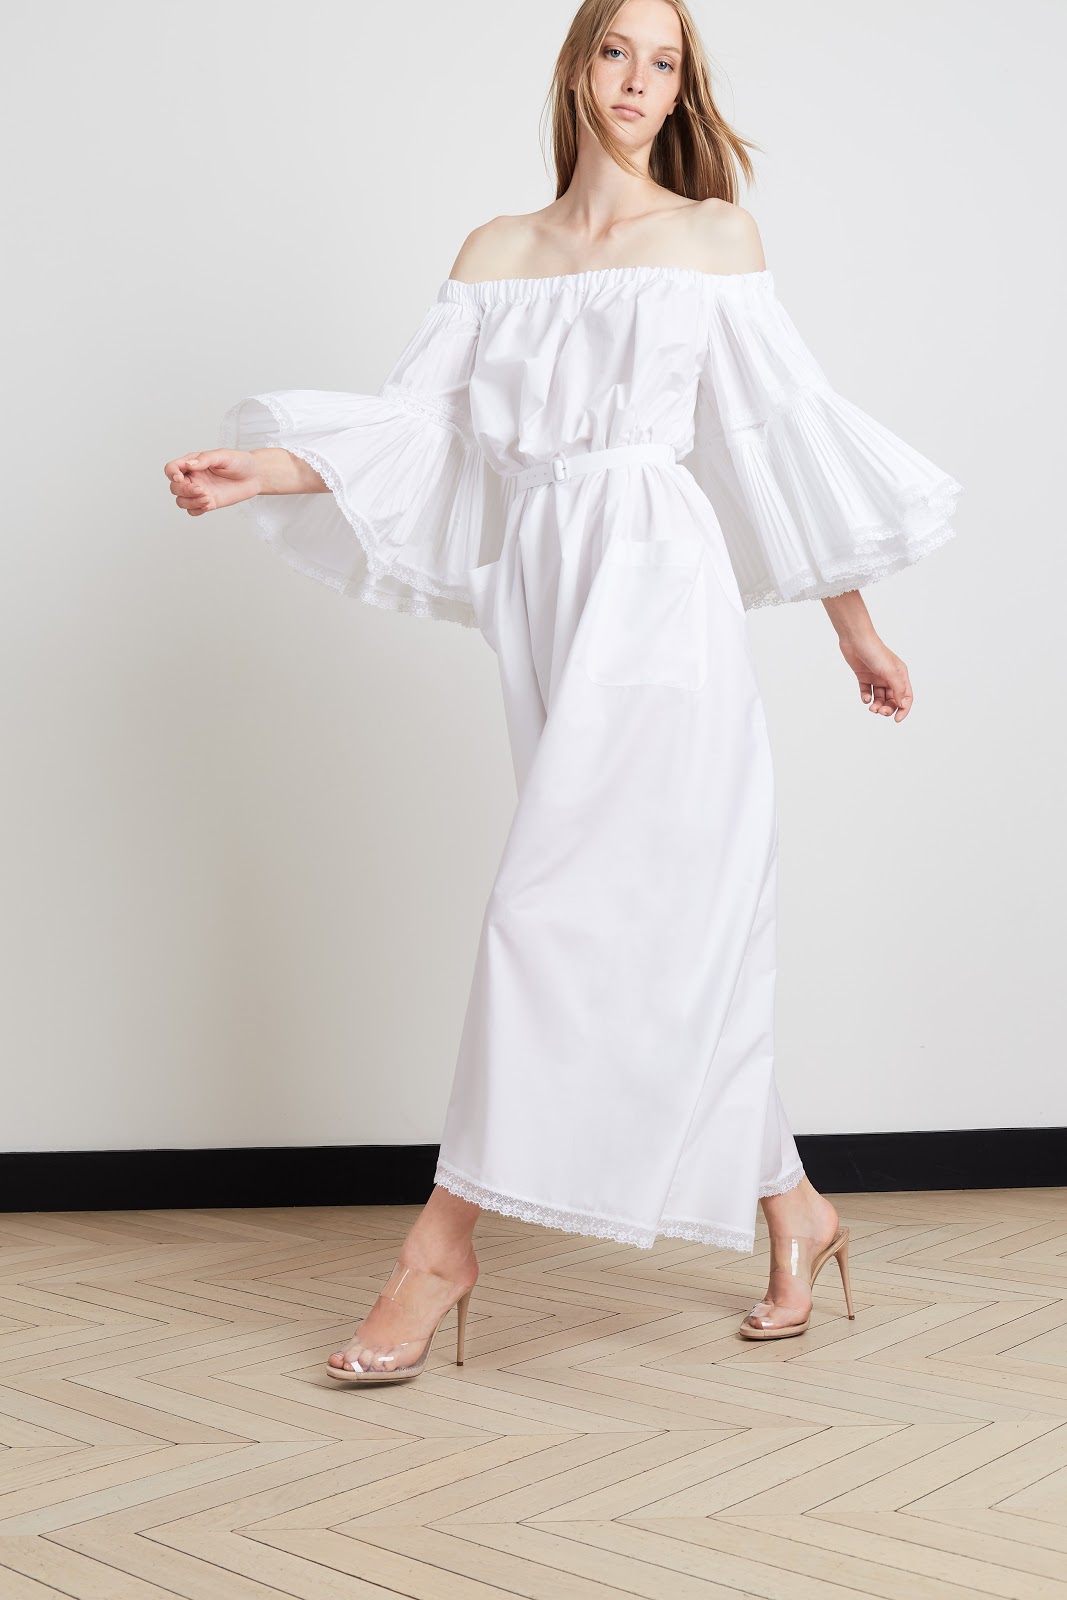 Alexis Mabille Resort 2020 | Cool Chic Style Fashion